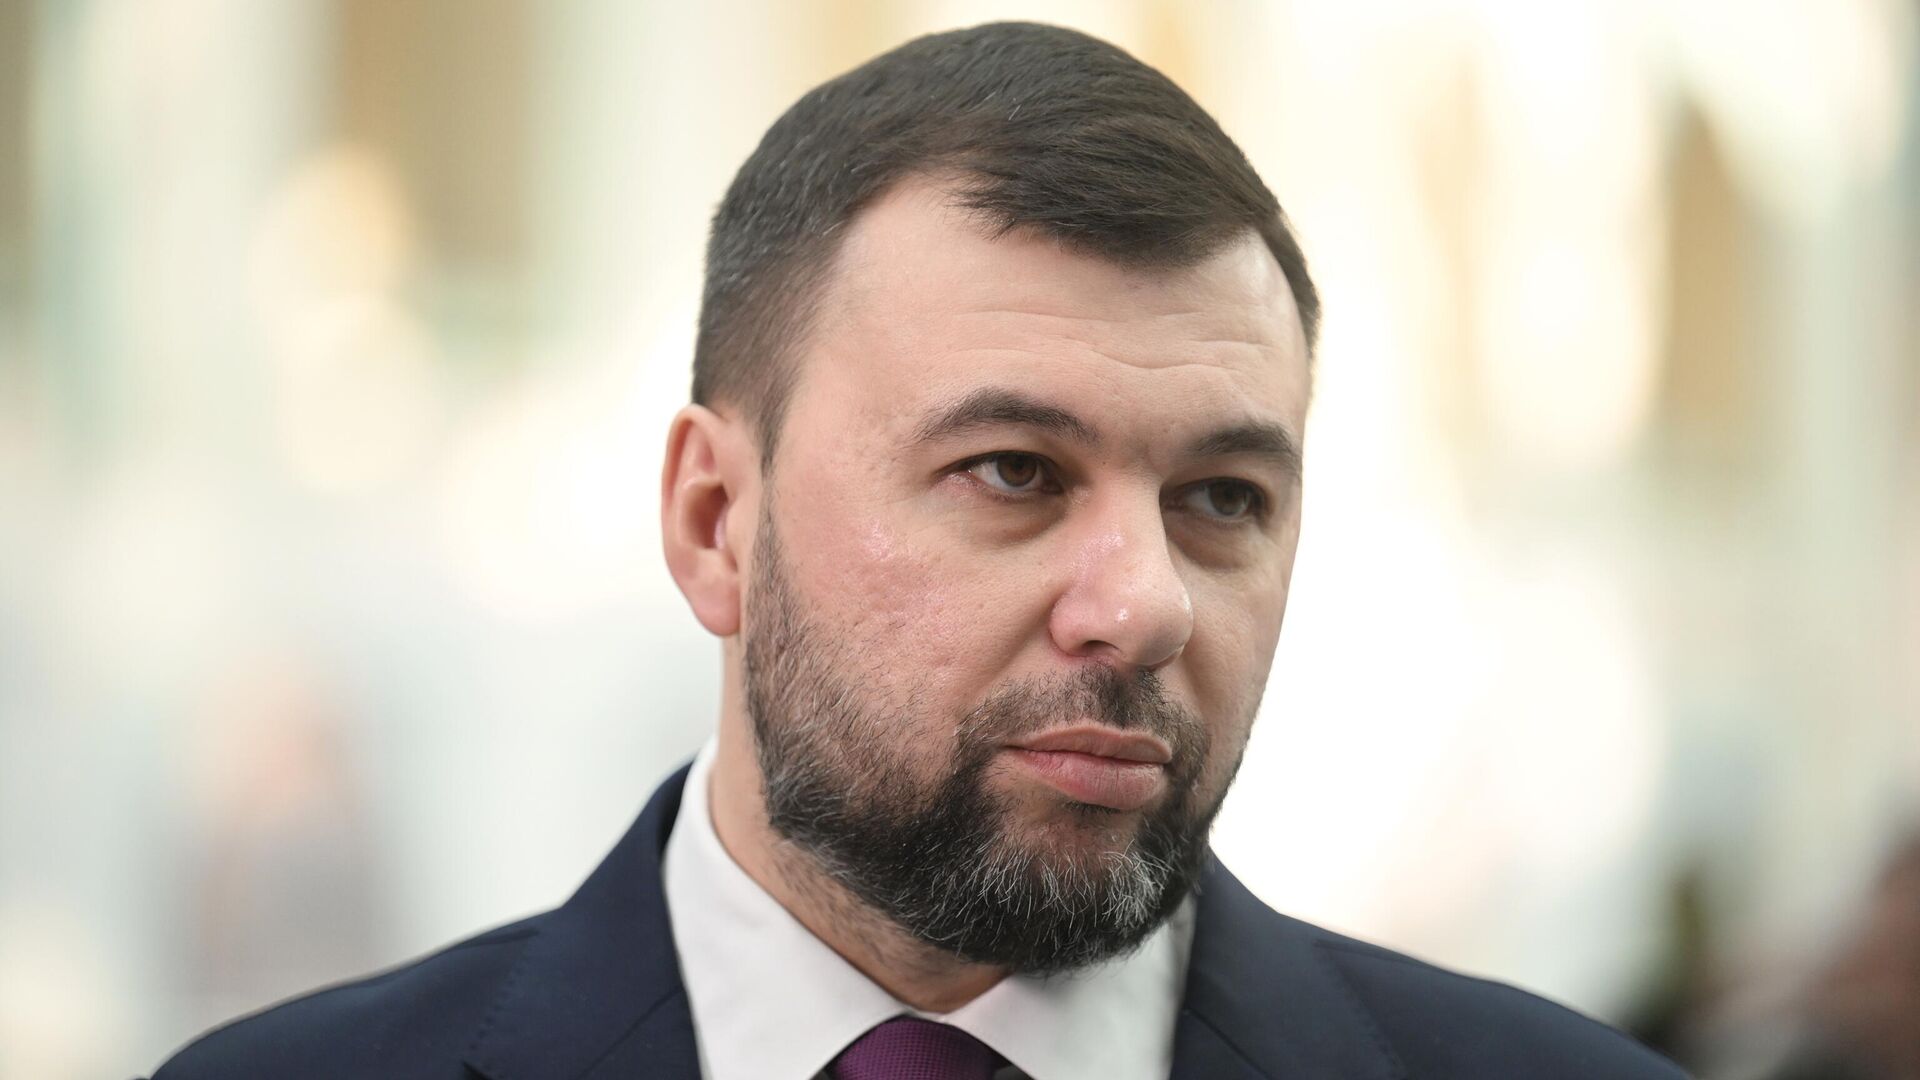 Pushilin said that the West encouraged all the actions of Kiev, including secret prisons